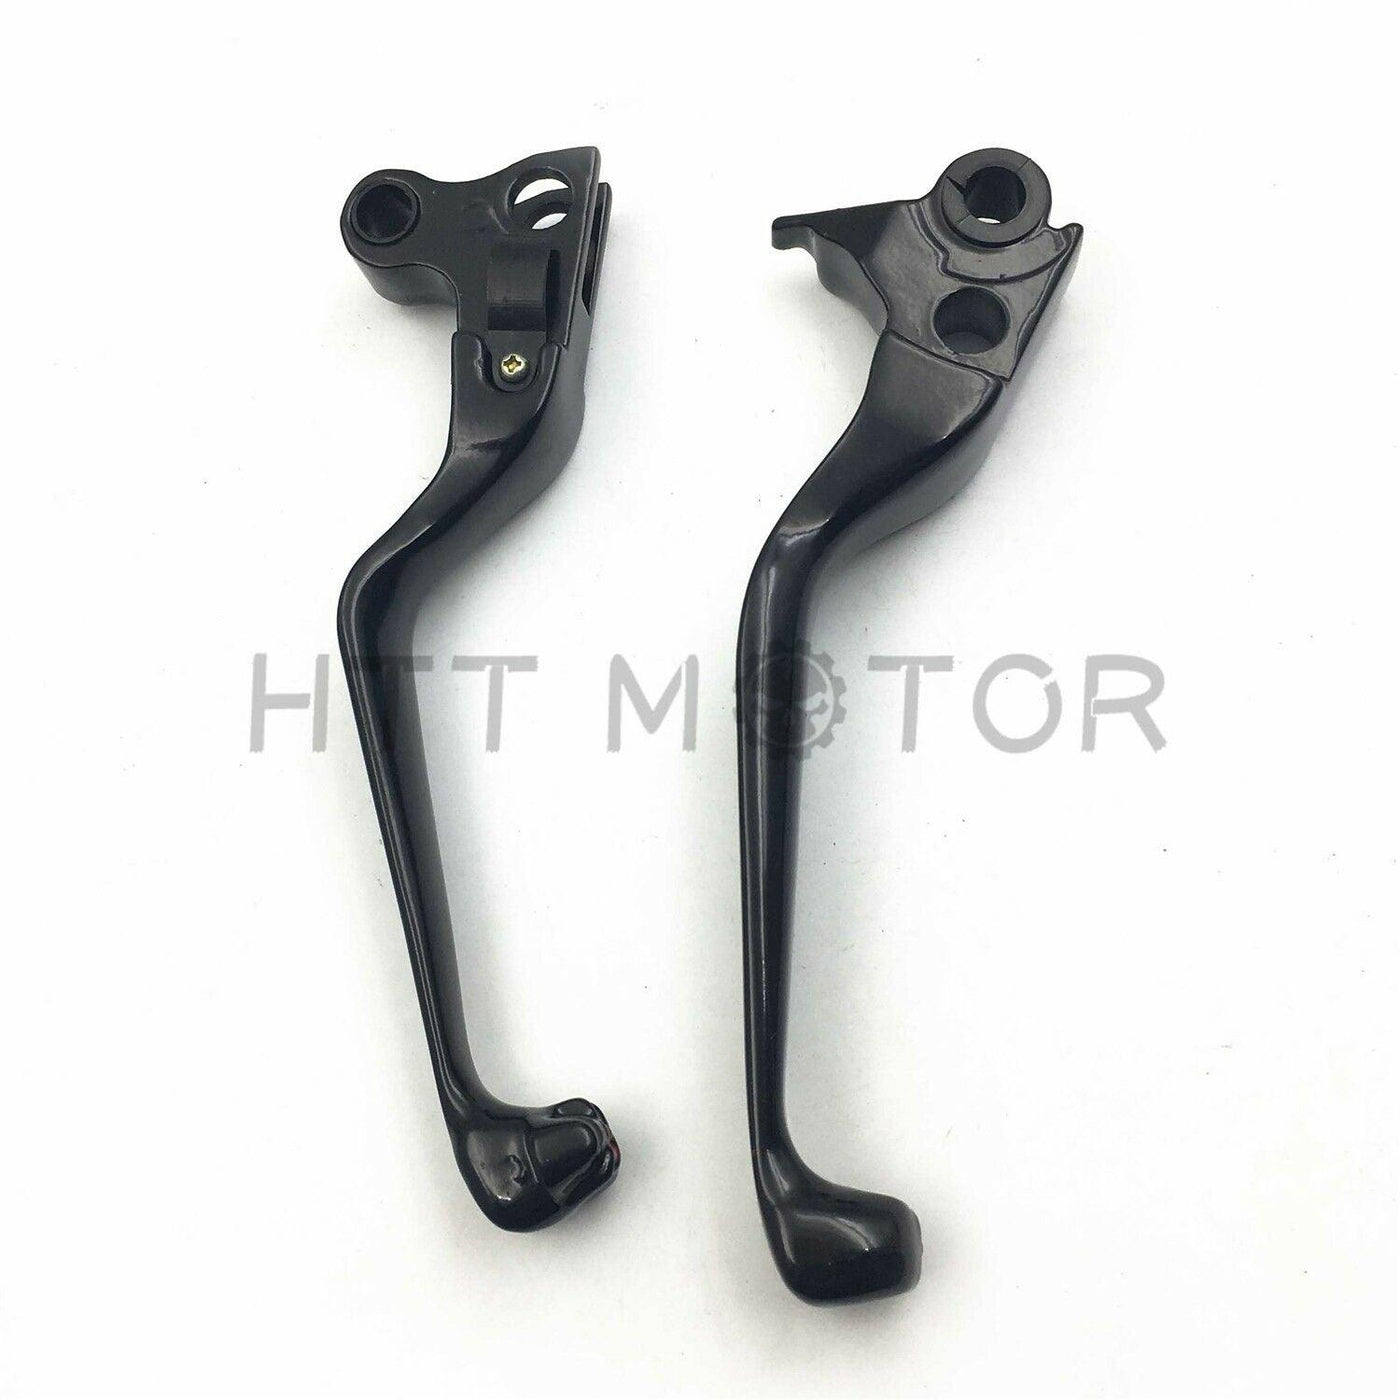 Brake Clutch Lever For Harley 96-03 XL 96-later Dyna 96-14 Softail Fat Boy - Moto Life Products